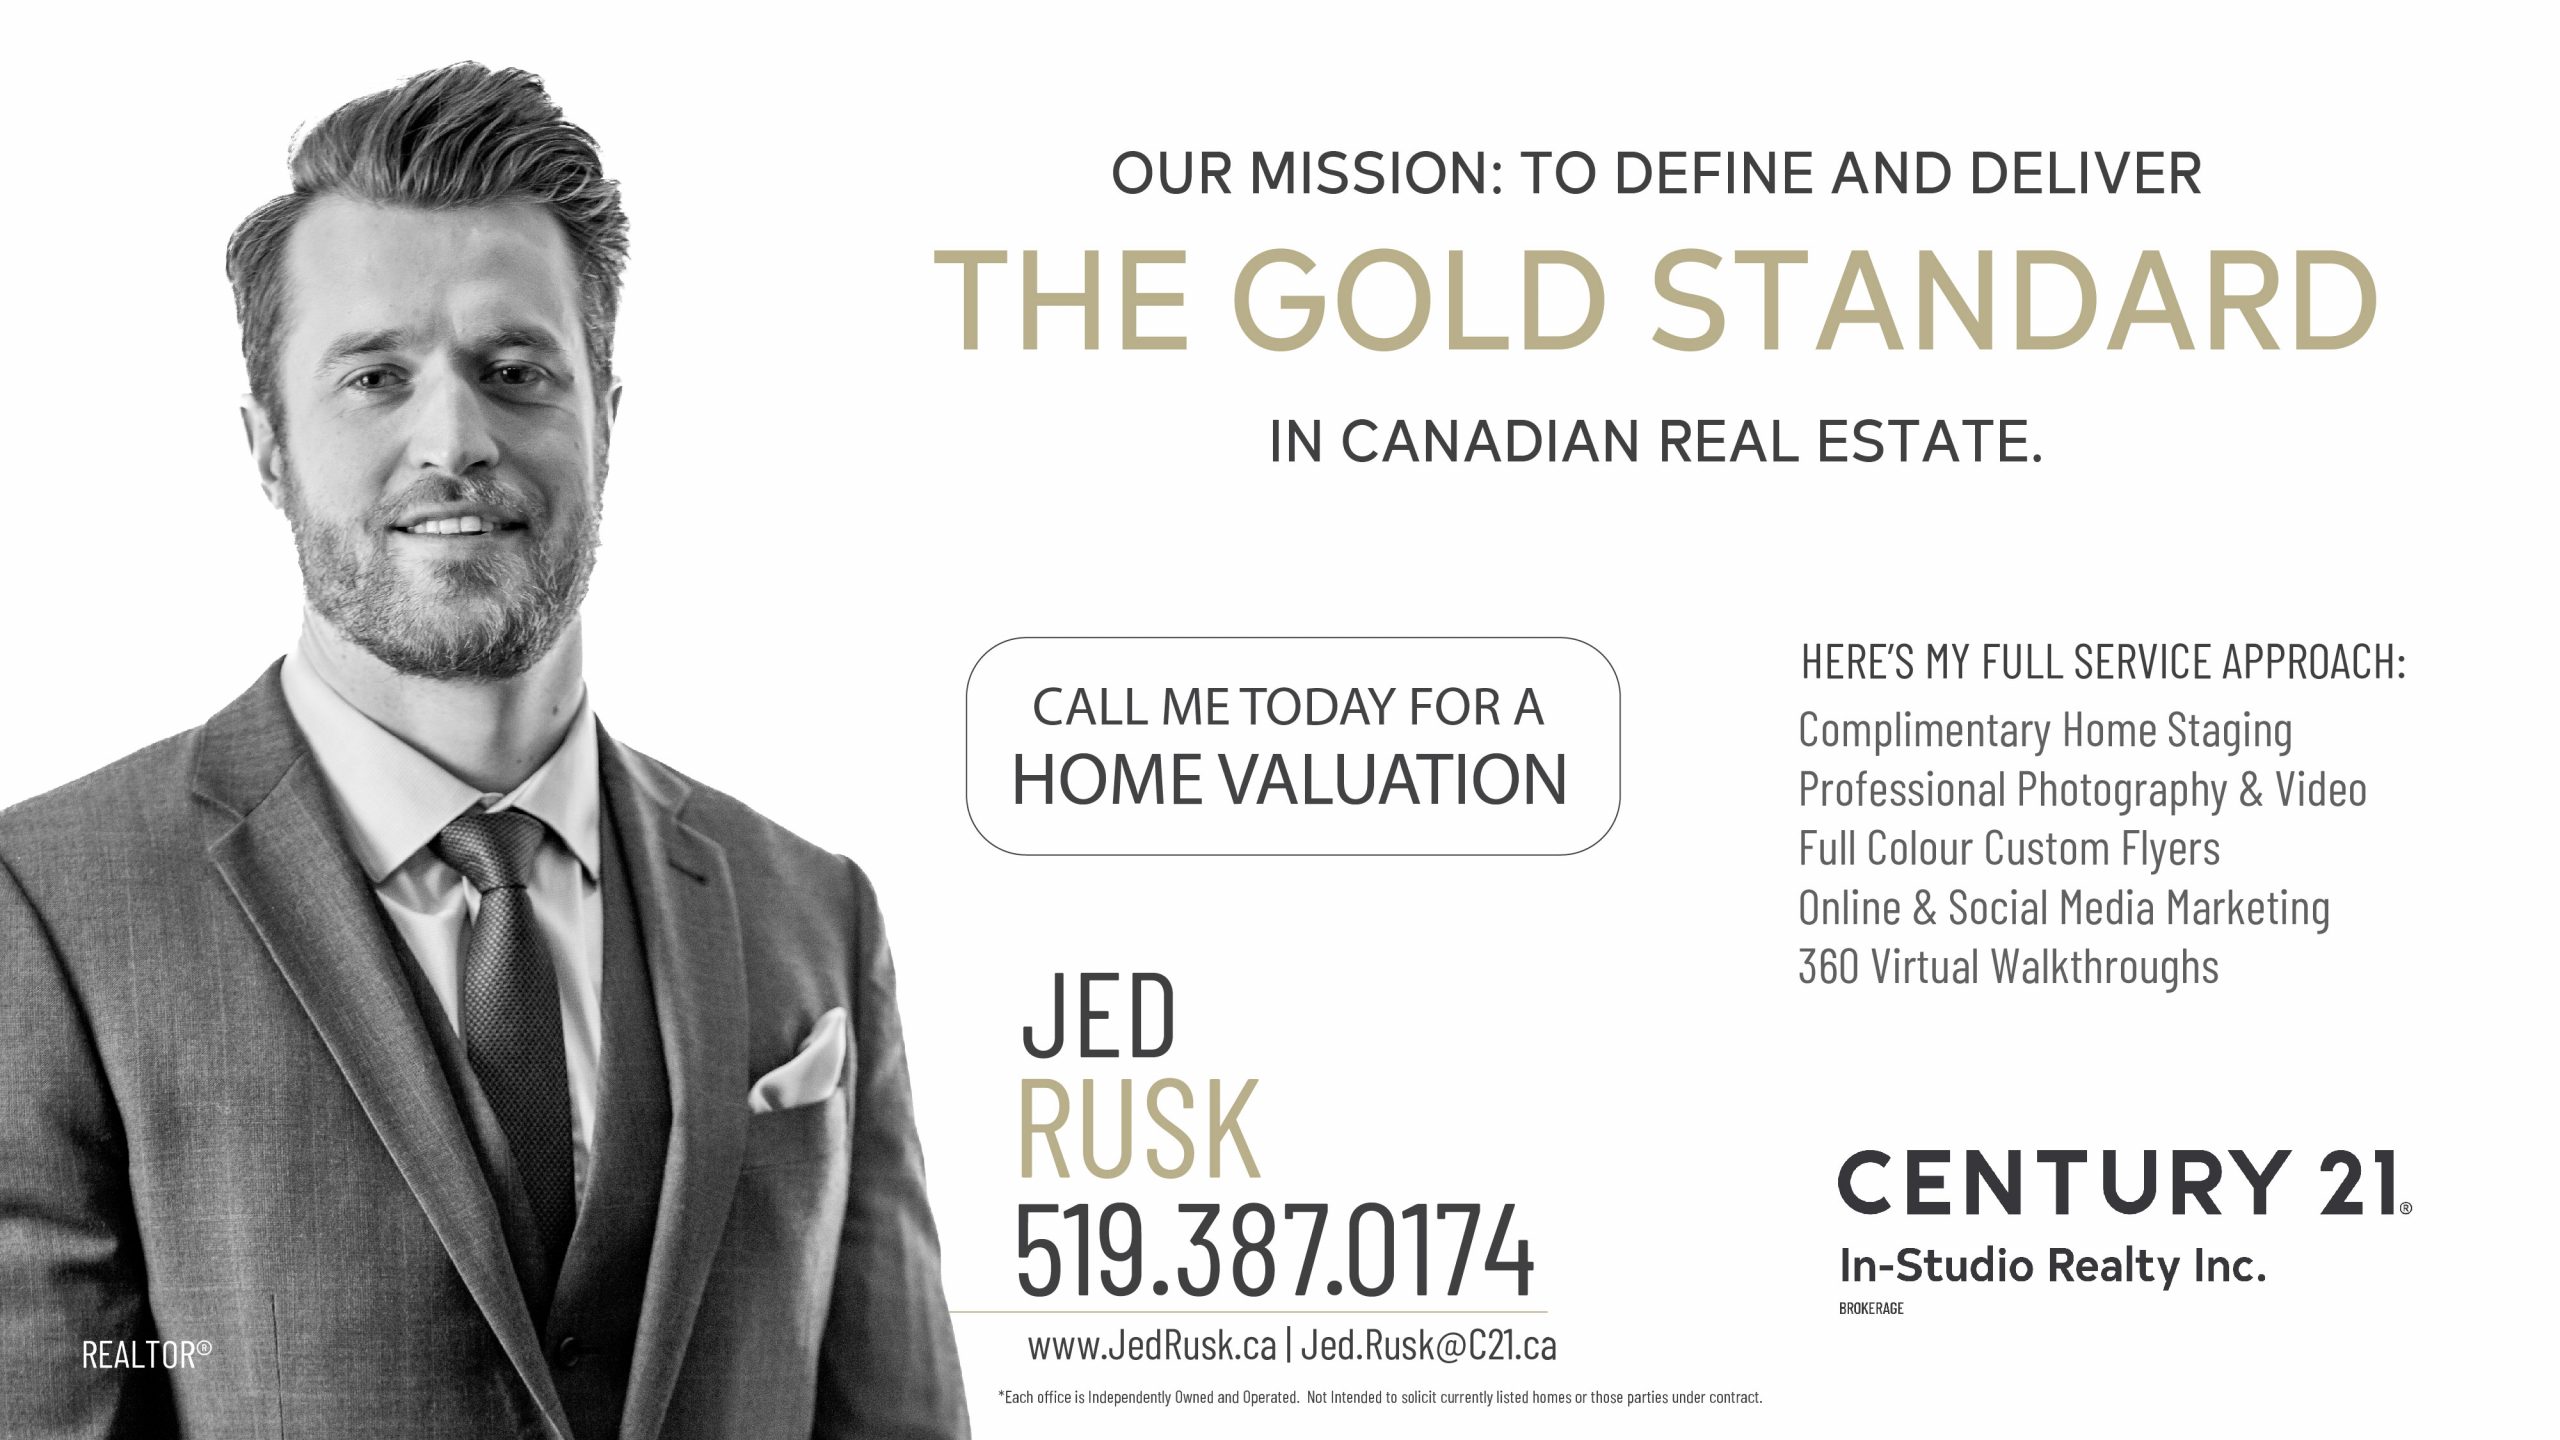 Jed Rusk, real estate agent